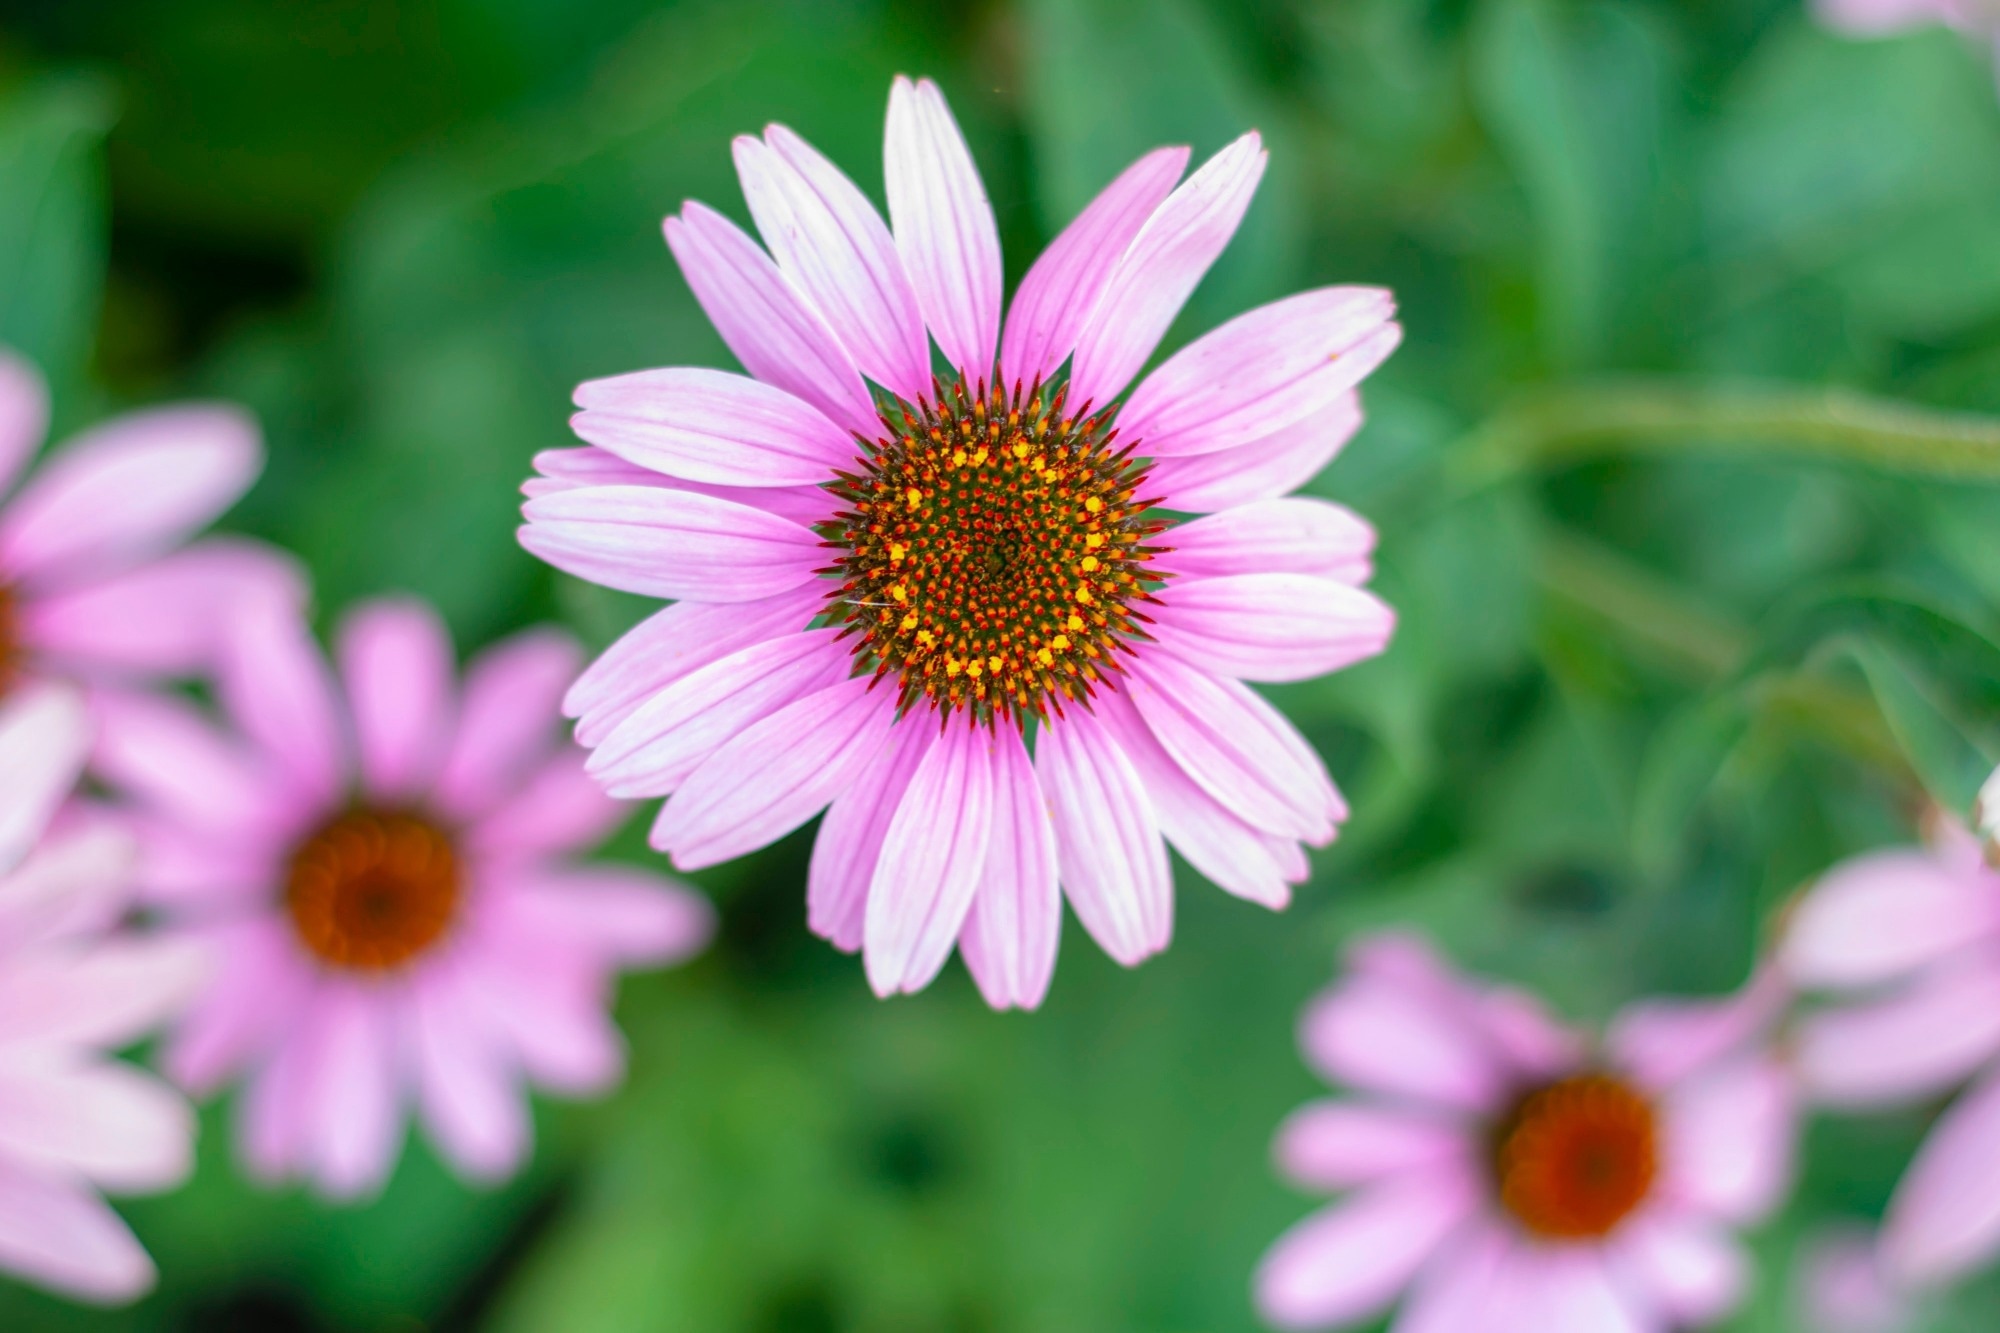 The Echinacea flower group belongs to the Asteraceae or composite flower family.  Image credit: Kyliki / Shutterstock